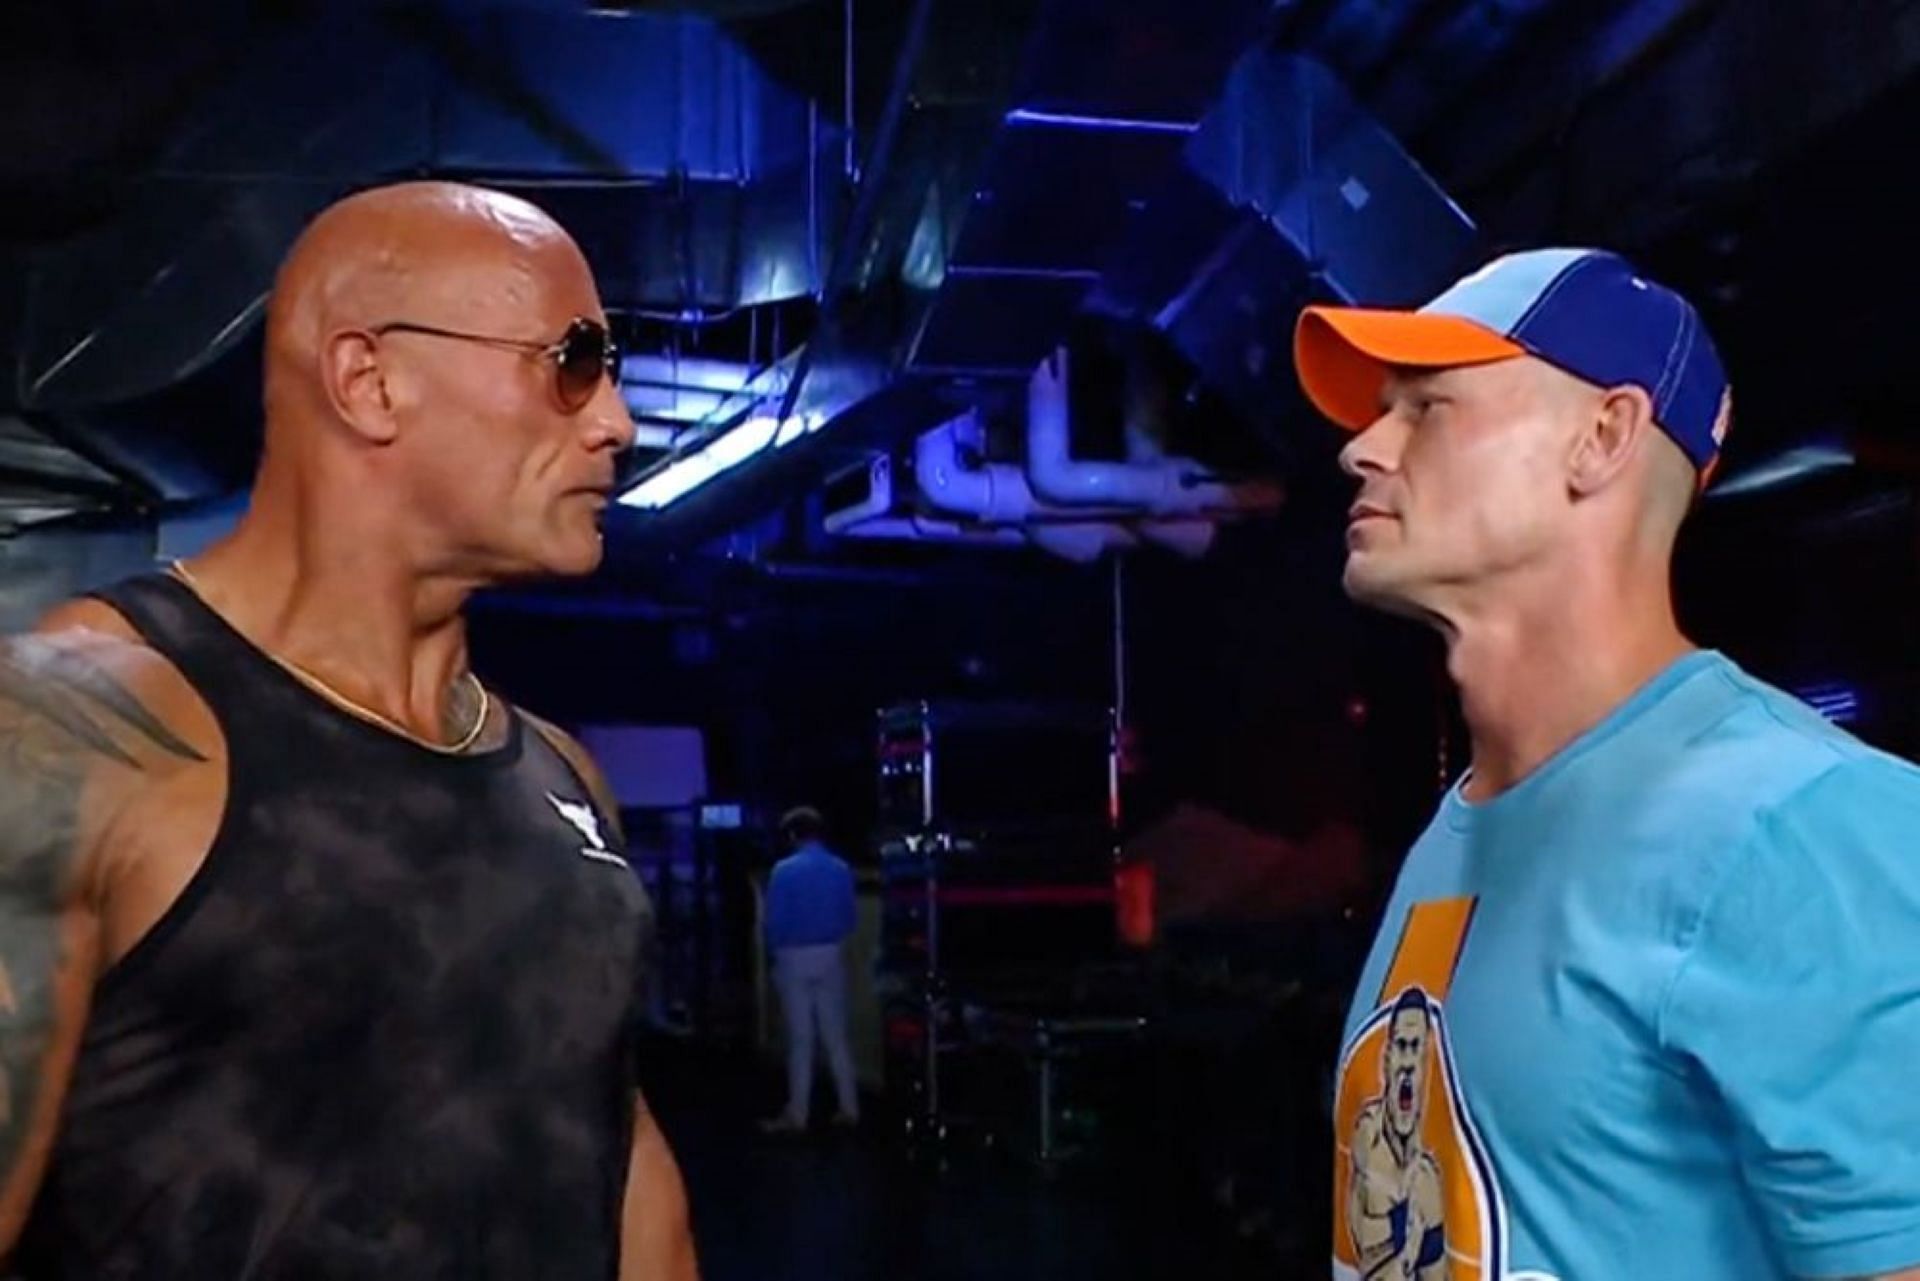 The Rock and John Cena met once again on WWE SmackDown.